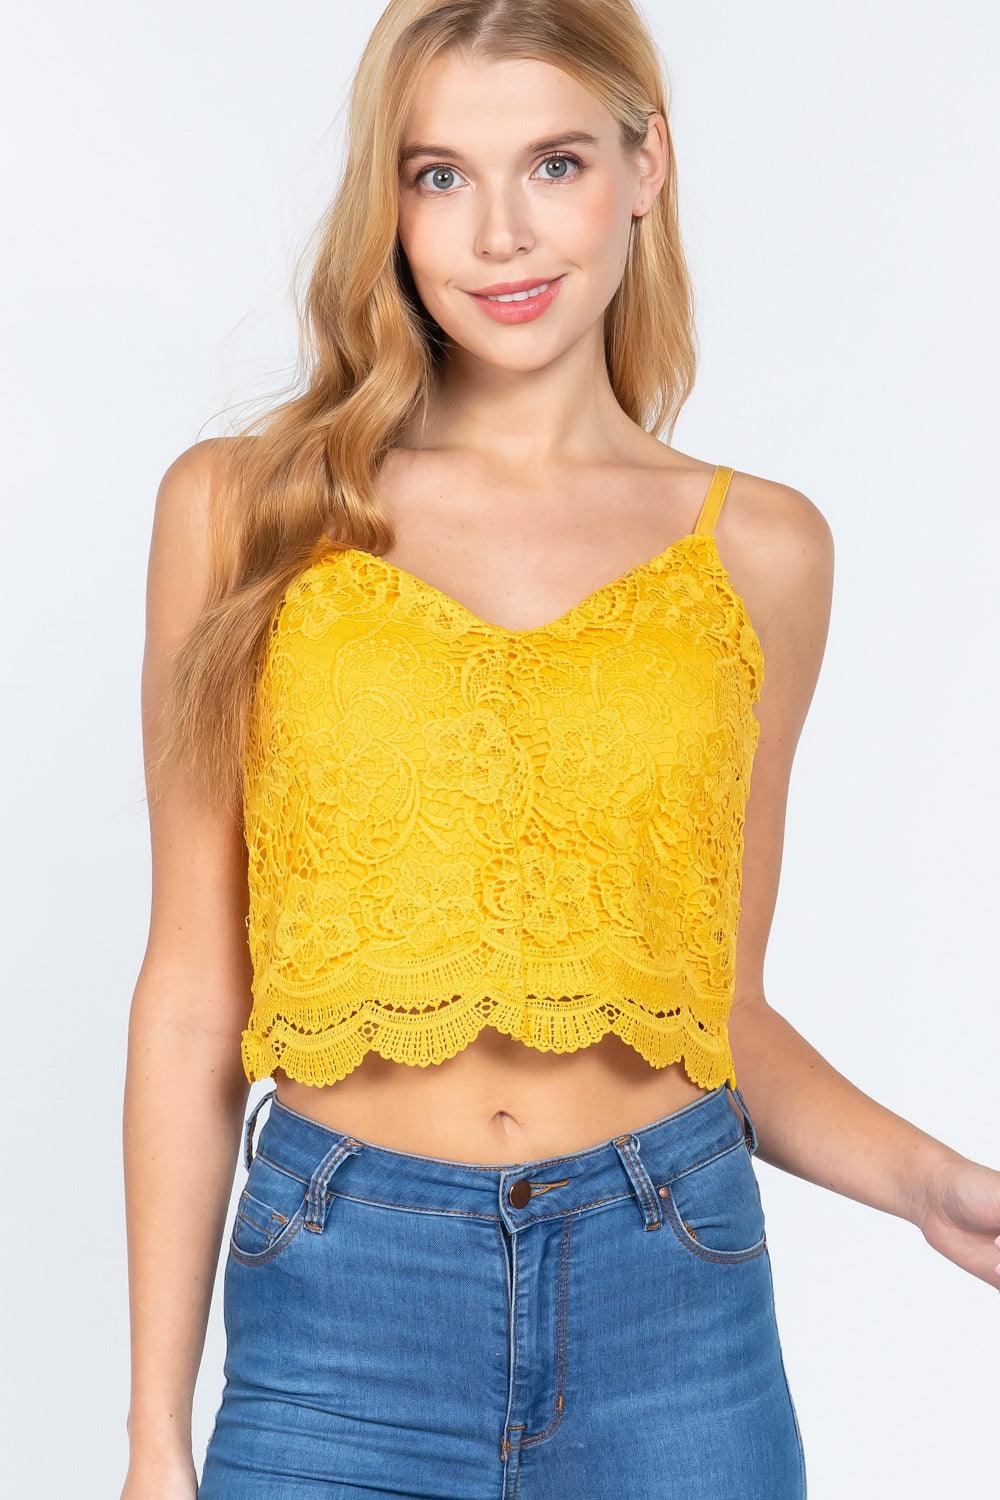 Crochet Lace Cami Woven Top Naughty Smile Fashion